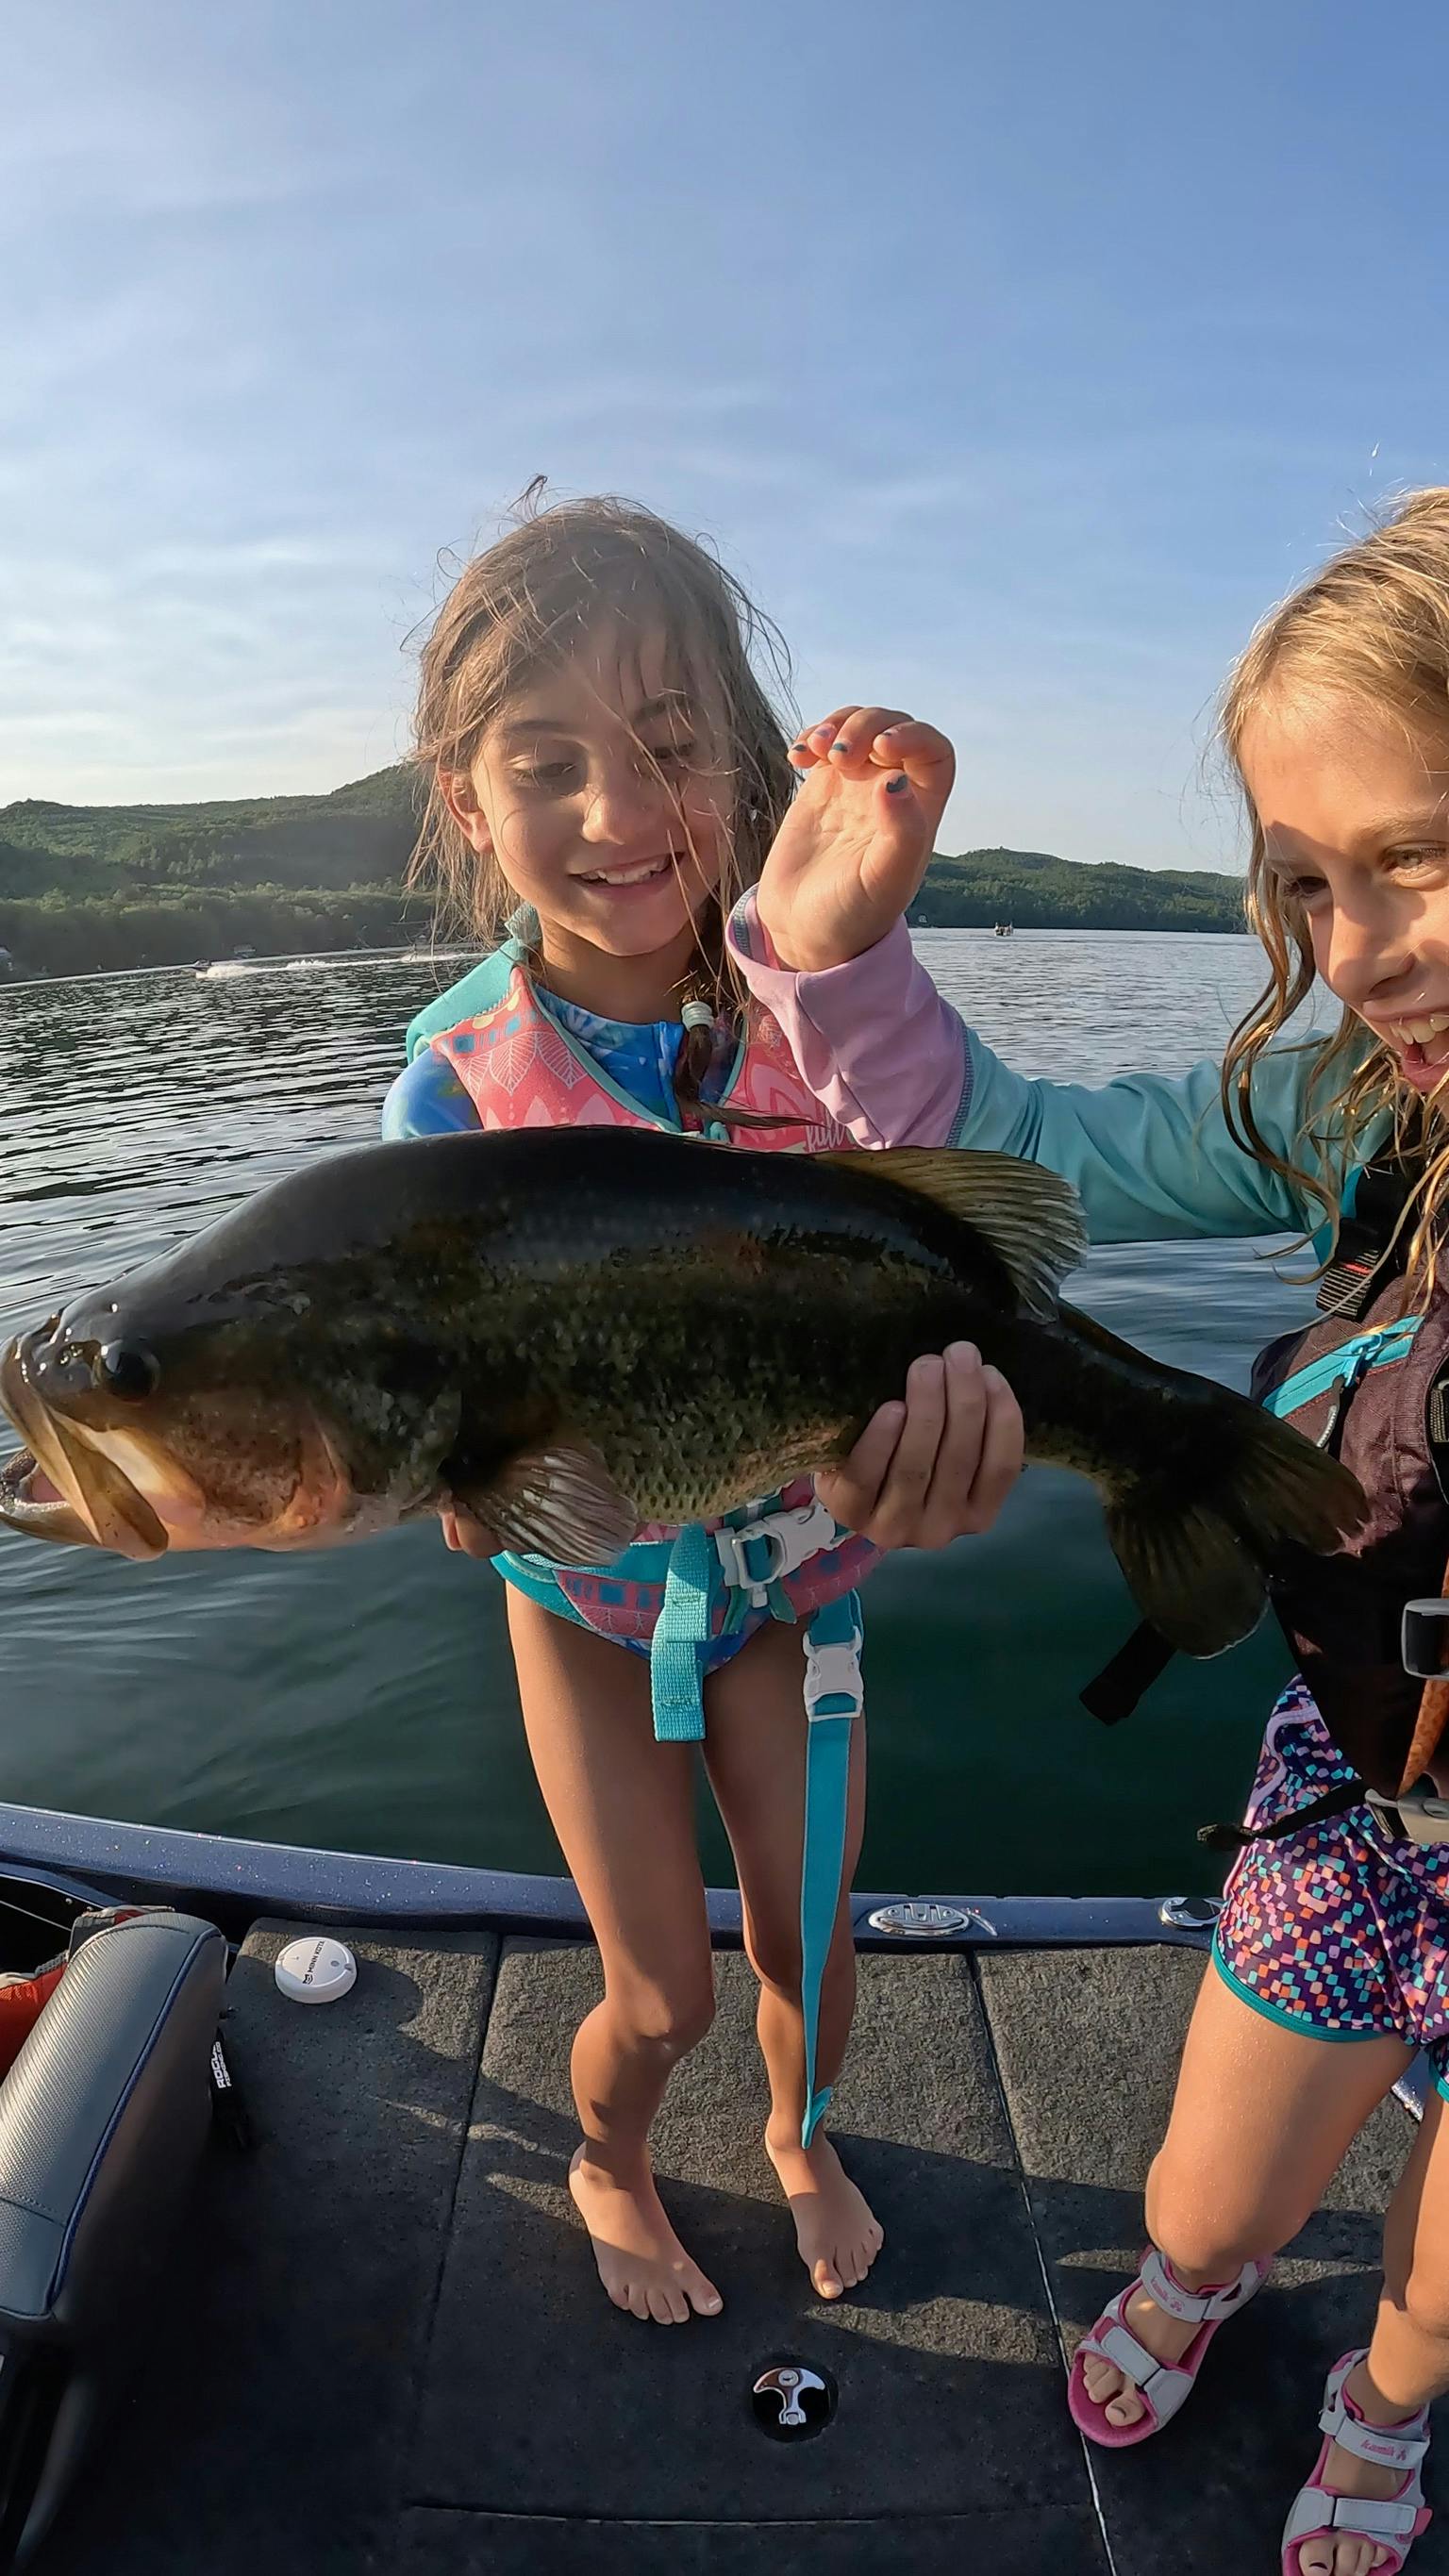 Two girls in swimsuits hold largemouth bass on blue boat